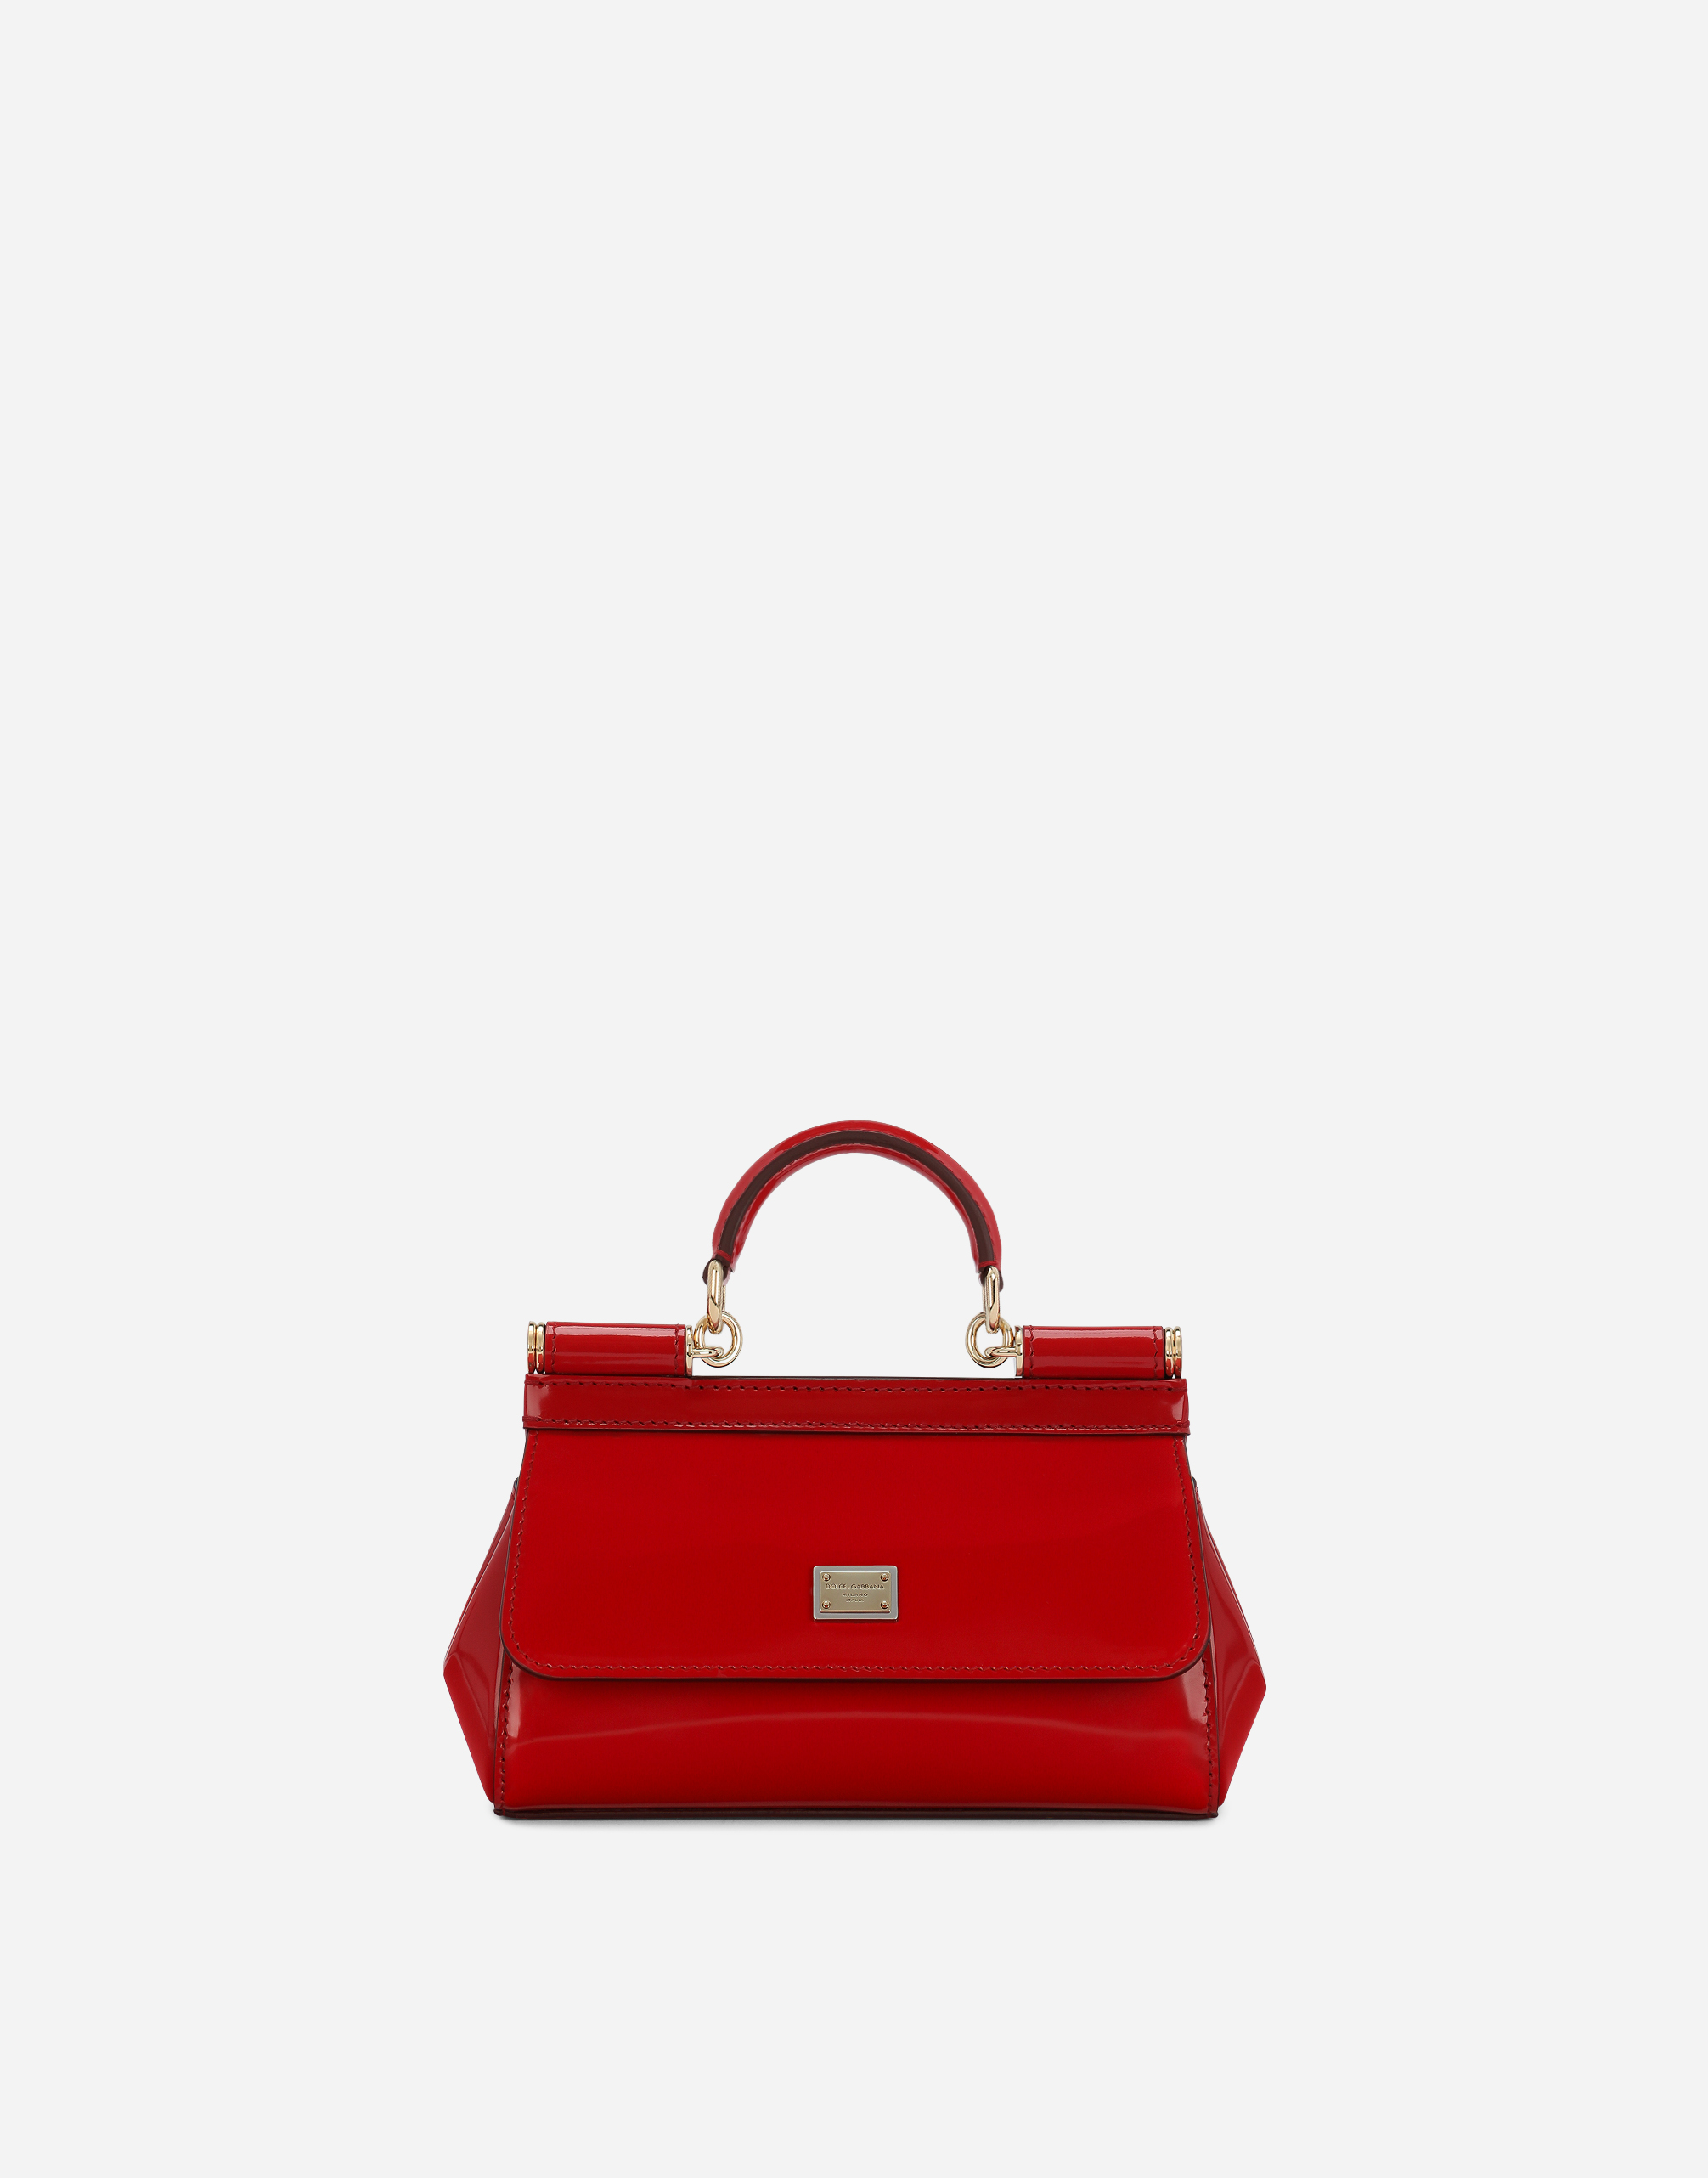 BORSA A MANO in Red